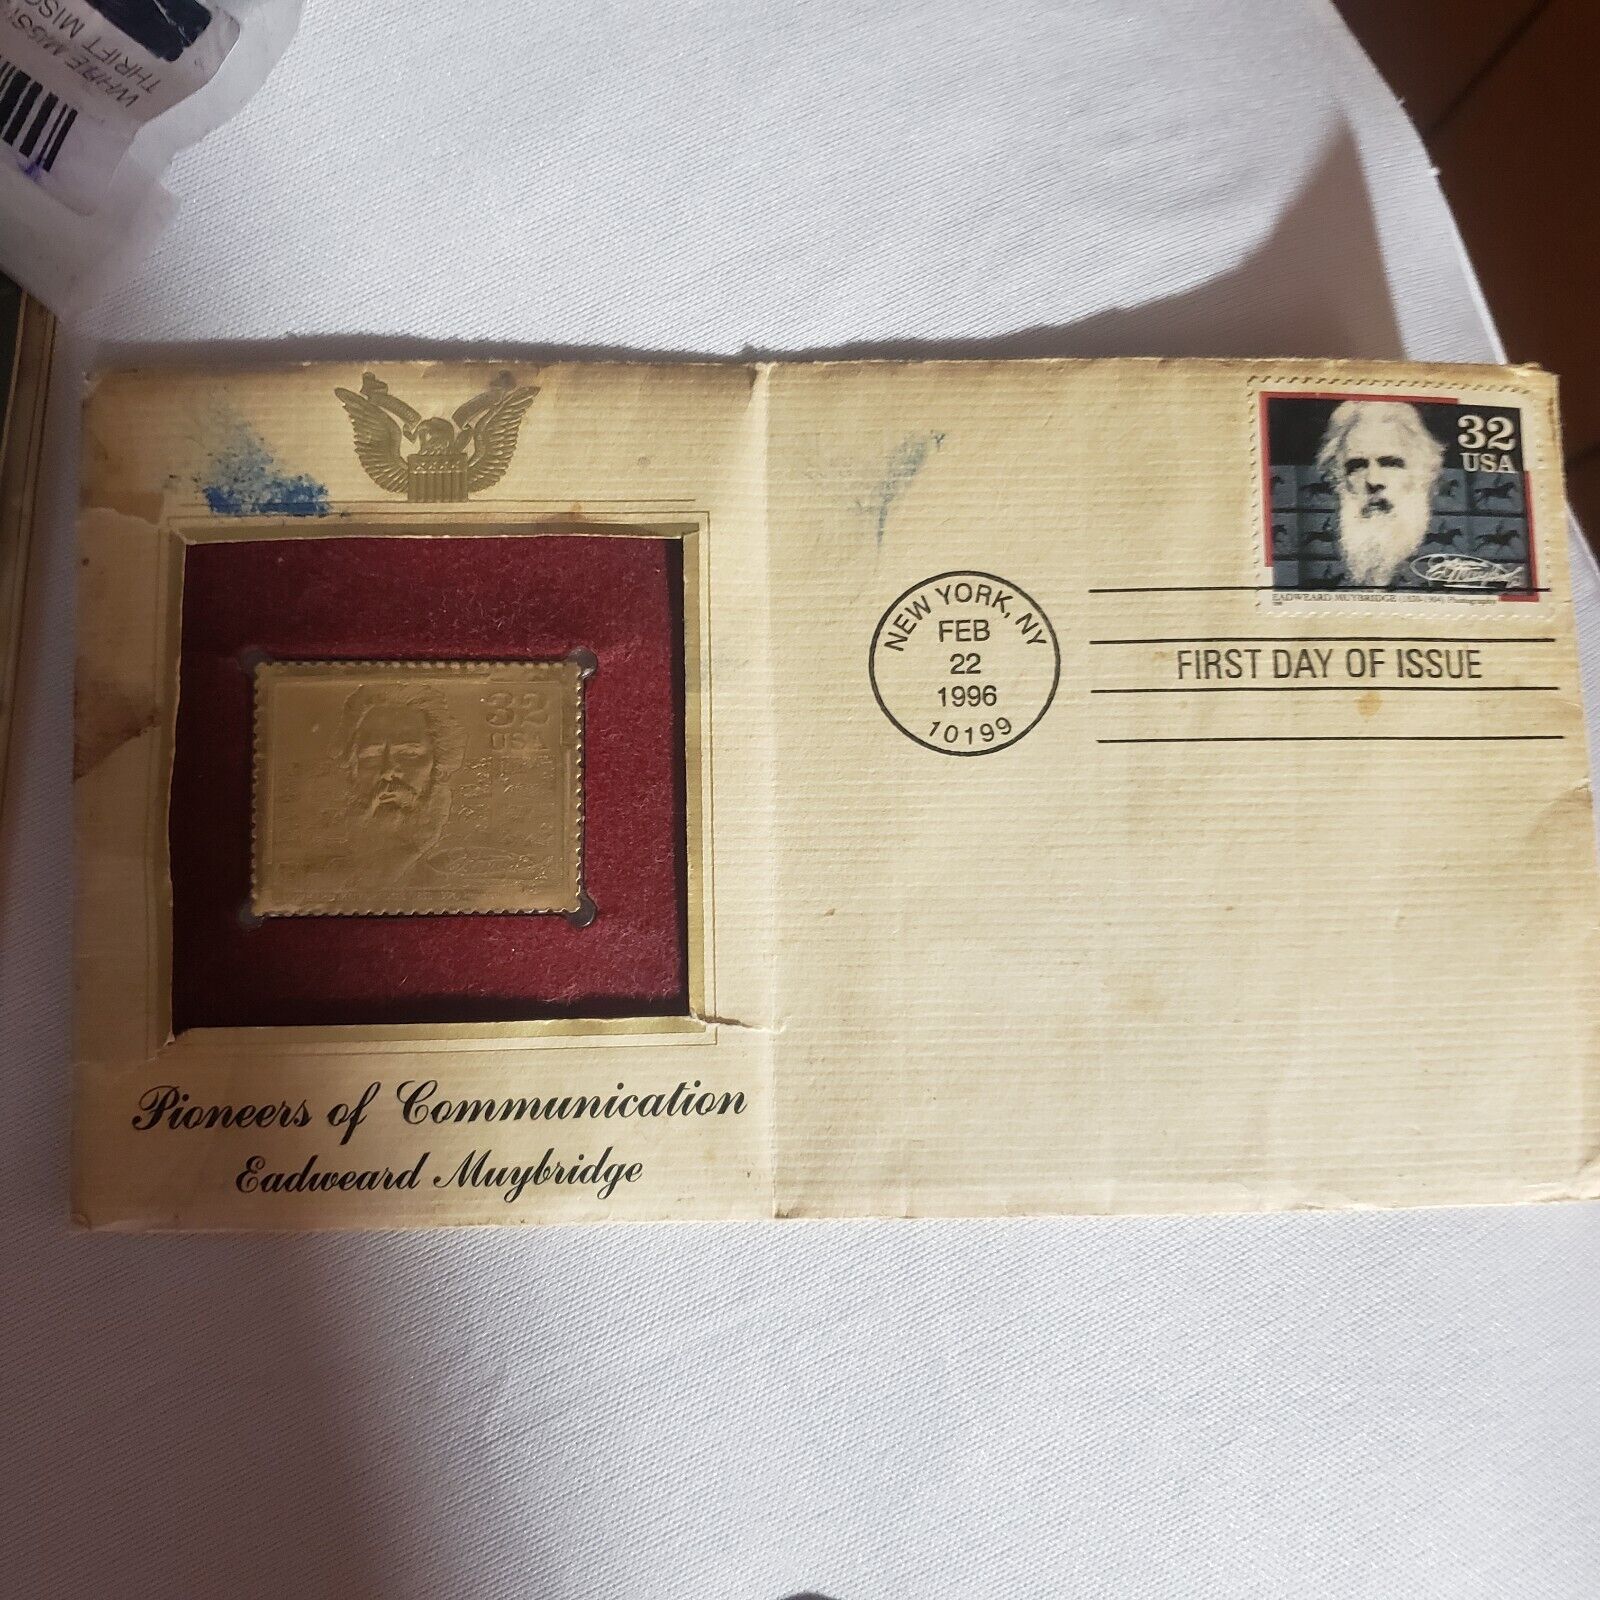 Have This Old Pioneers Of Communication Letter With Gold Stamp